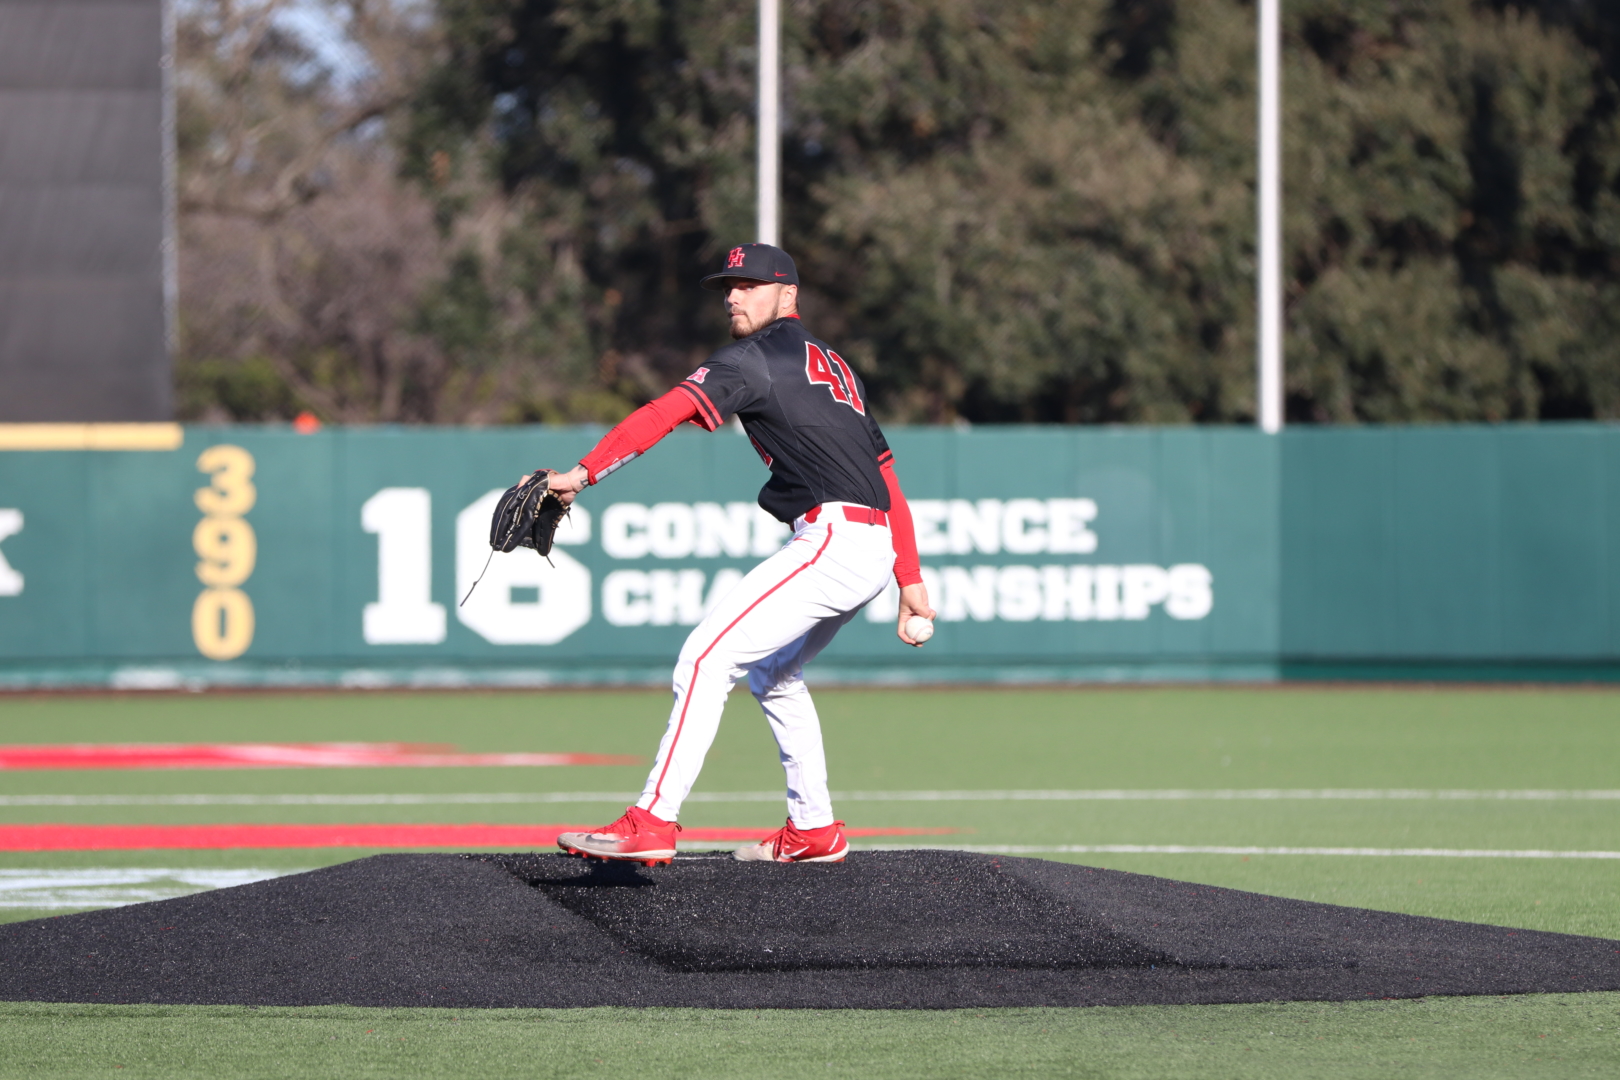 Right-handed pitcher Derrick Cherry allowed one earned run while striking out eight in seven innings of work in UH baseball's victory over Sam Houston State on Tuesday night. | James Mueller/The Cougar